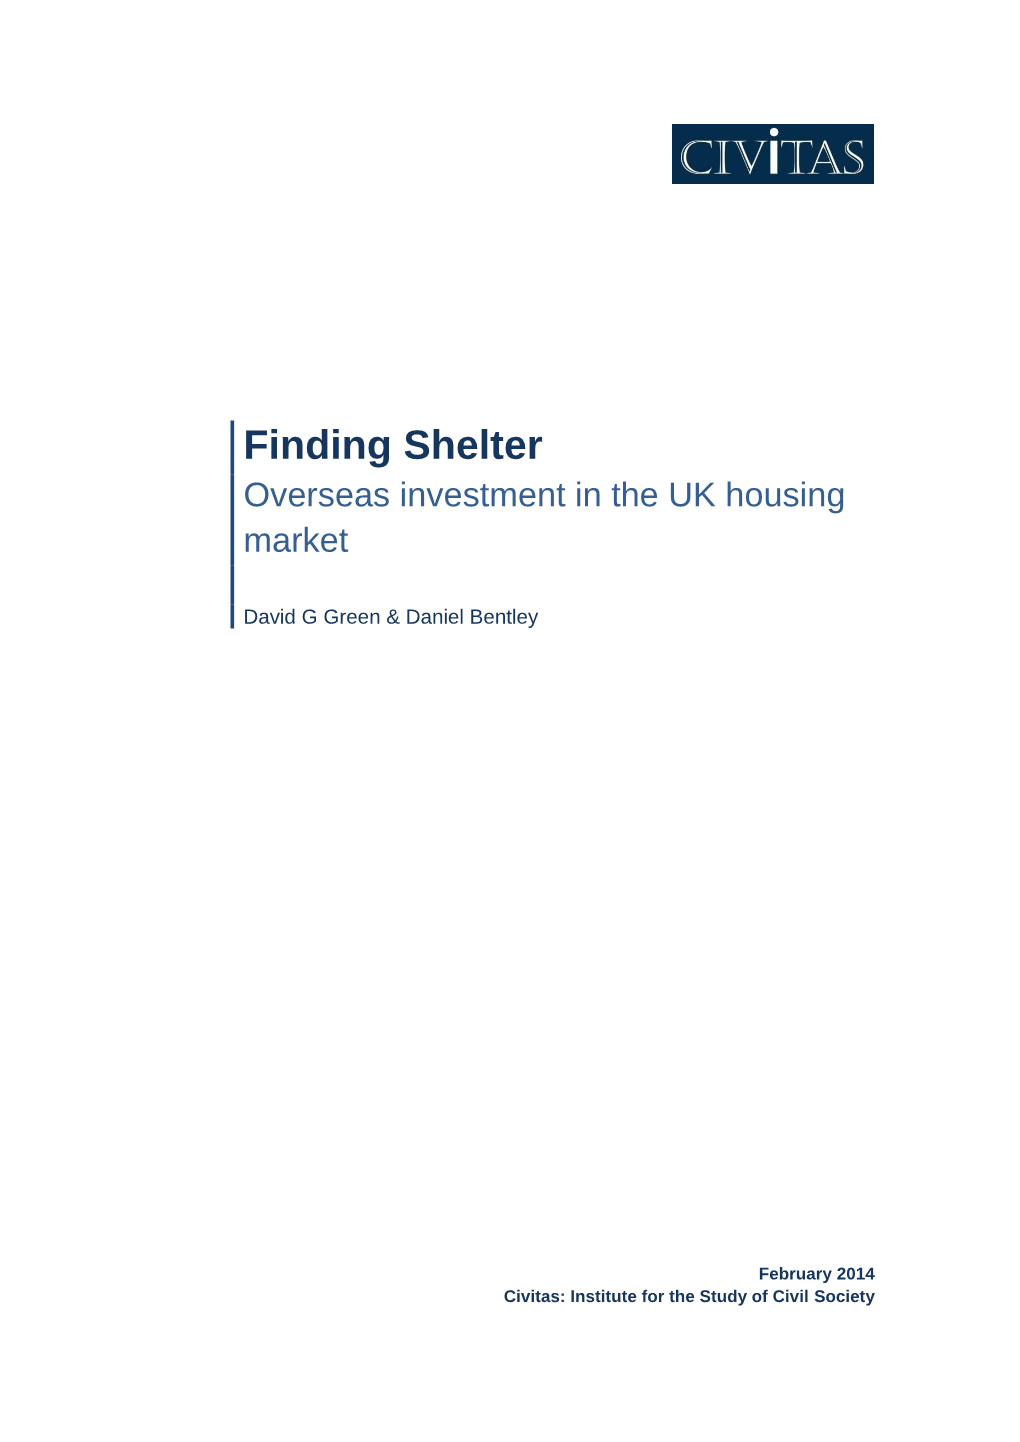 Finding Shelter Overseas Investment in the UK Housing Market